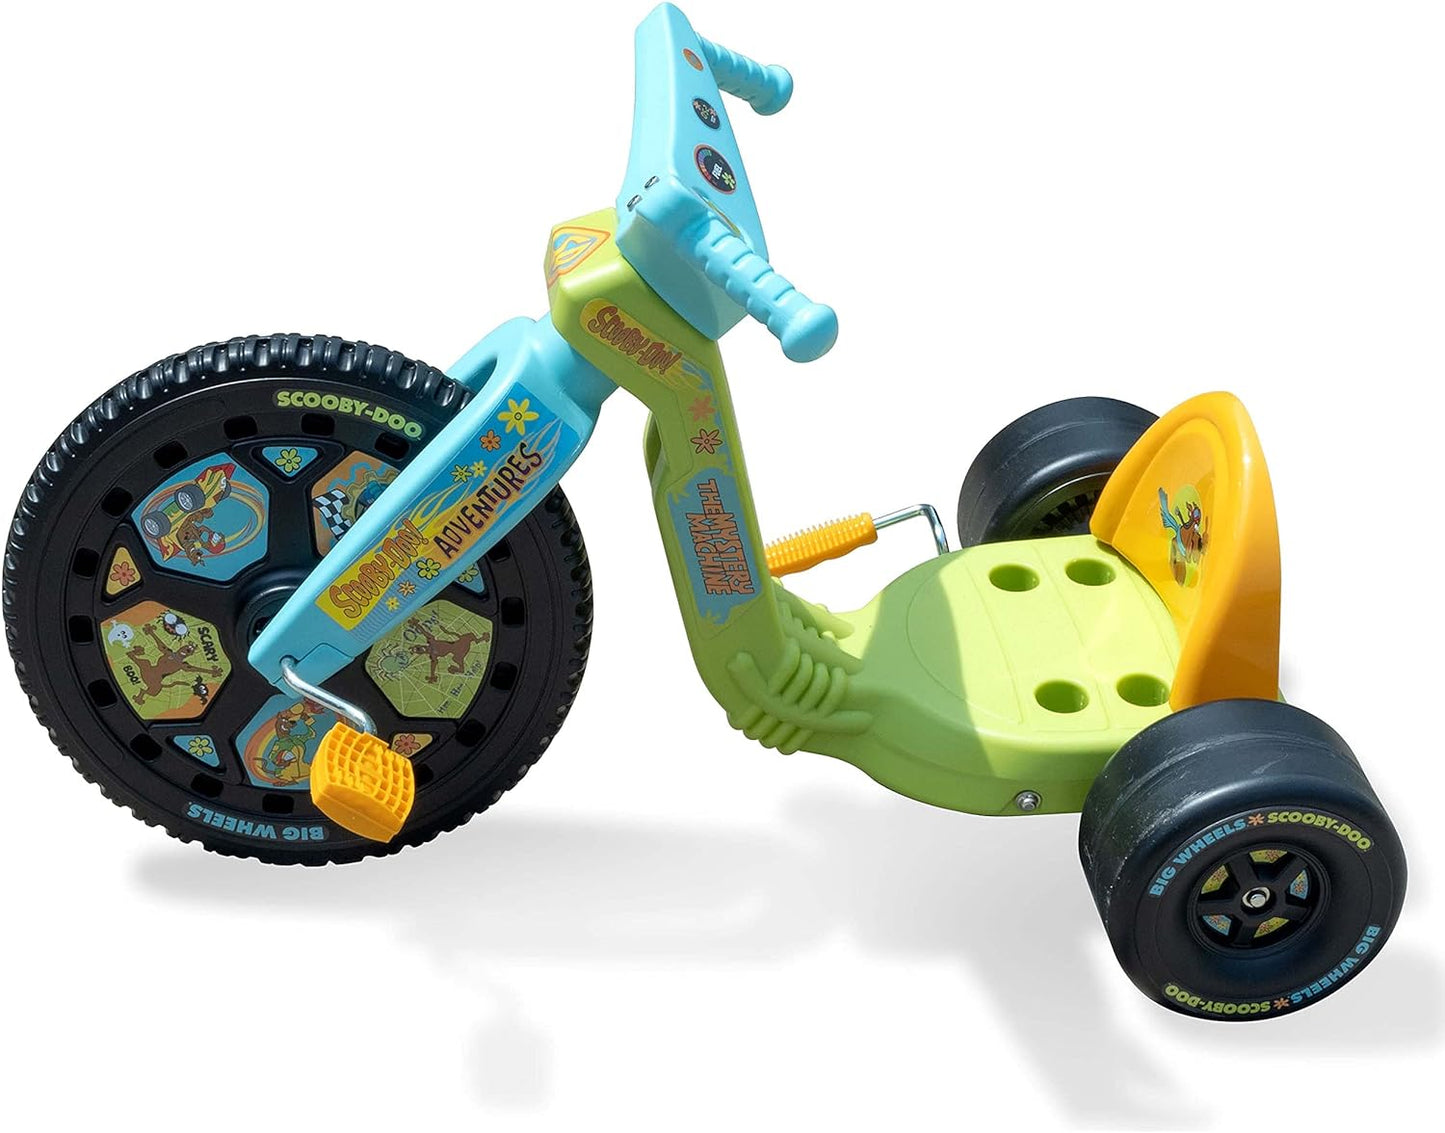 The Original Big Wheel 16 Inch Tricycle - Big Wheel for Kids 3-8 Boys Girls Outdoor Kids Toys Drift Trike with Spin Out Hand Brake